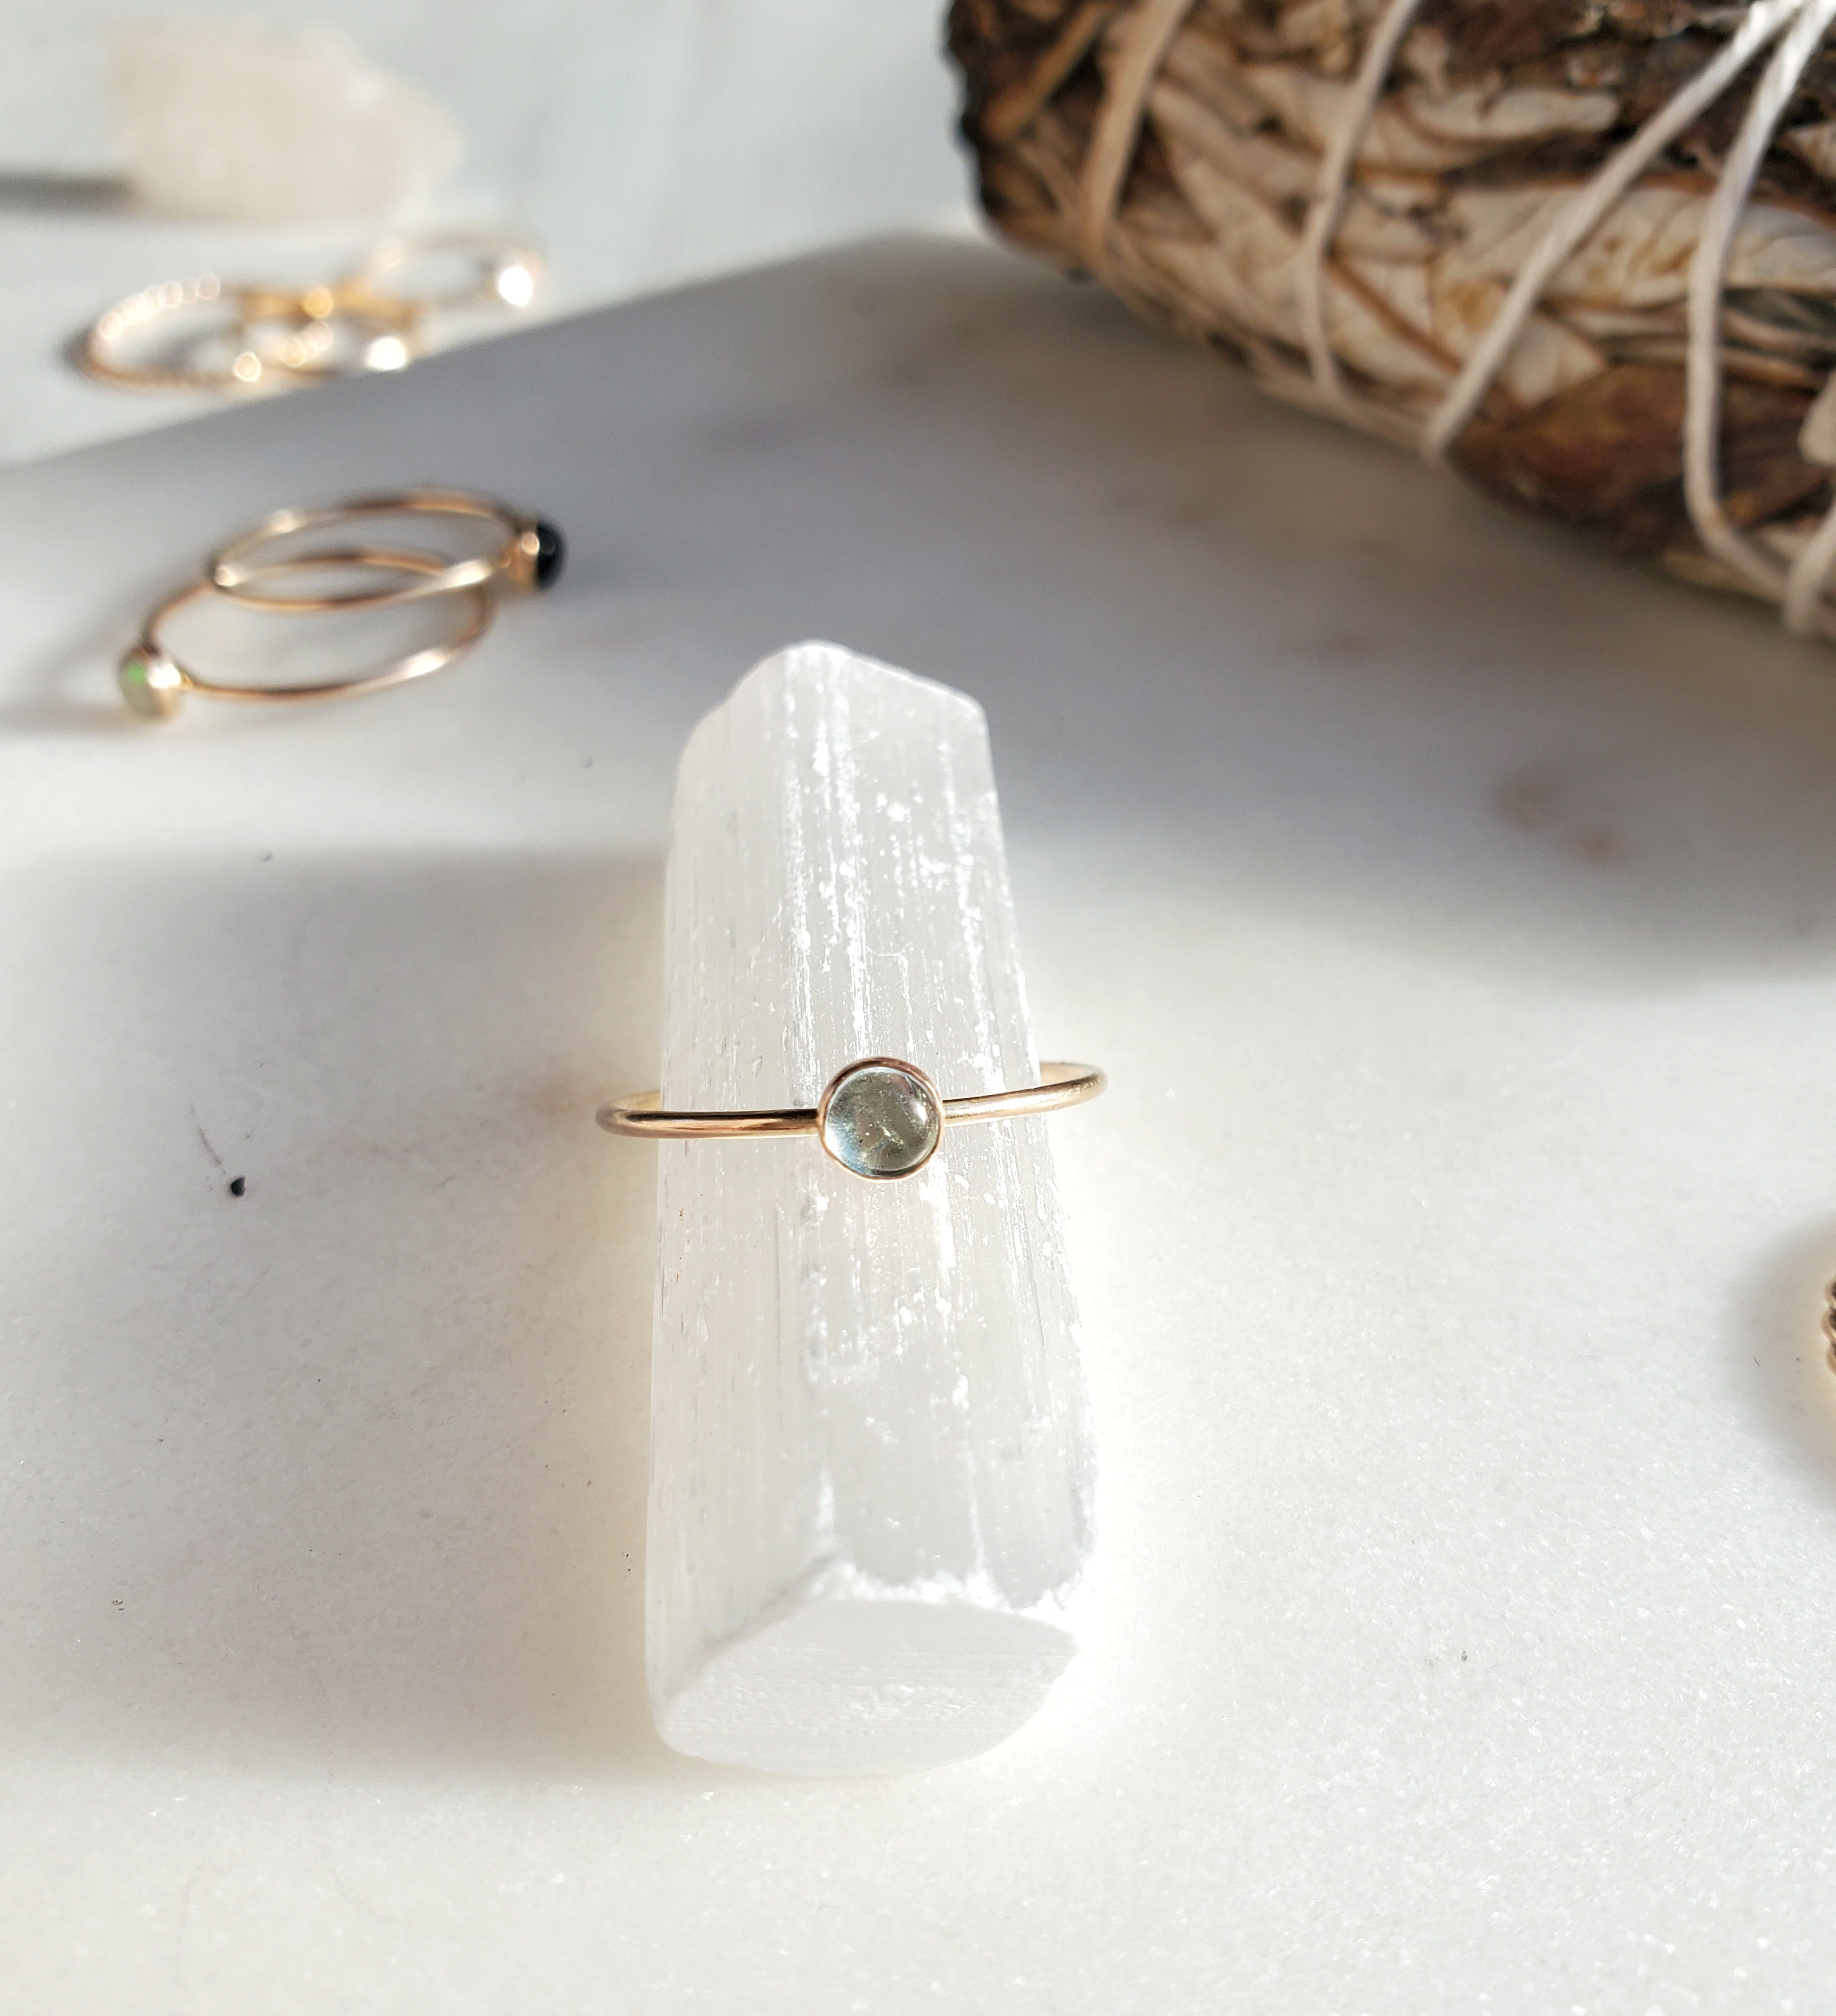 Moonstone and gold ring on a selenite crystal with sage and other rings in the background sparkling in the sun